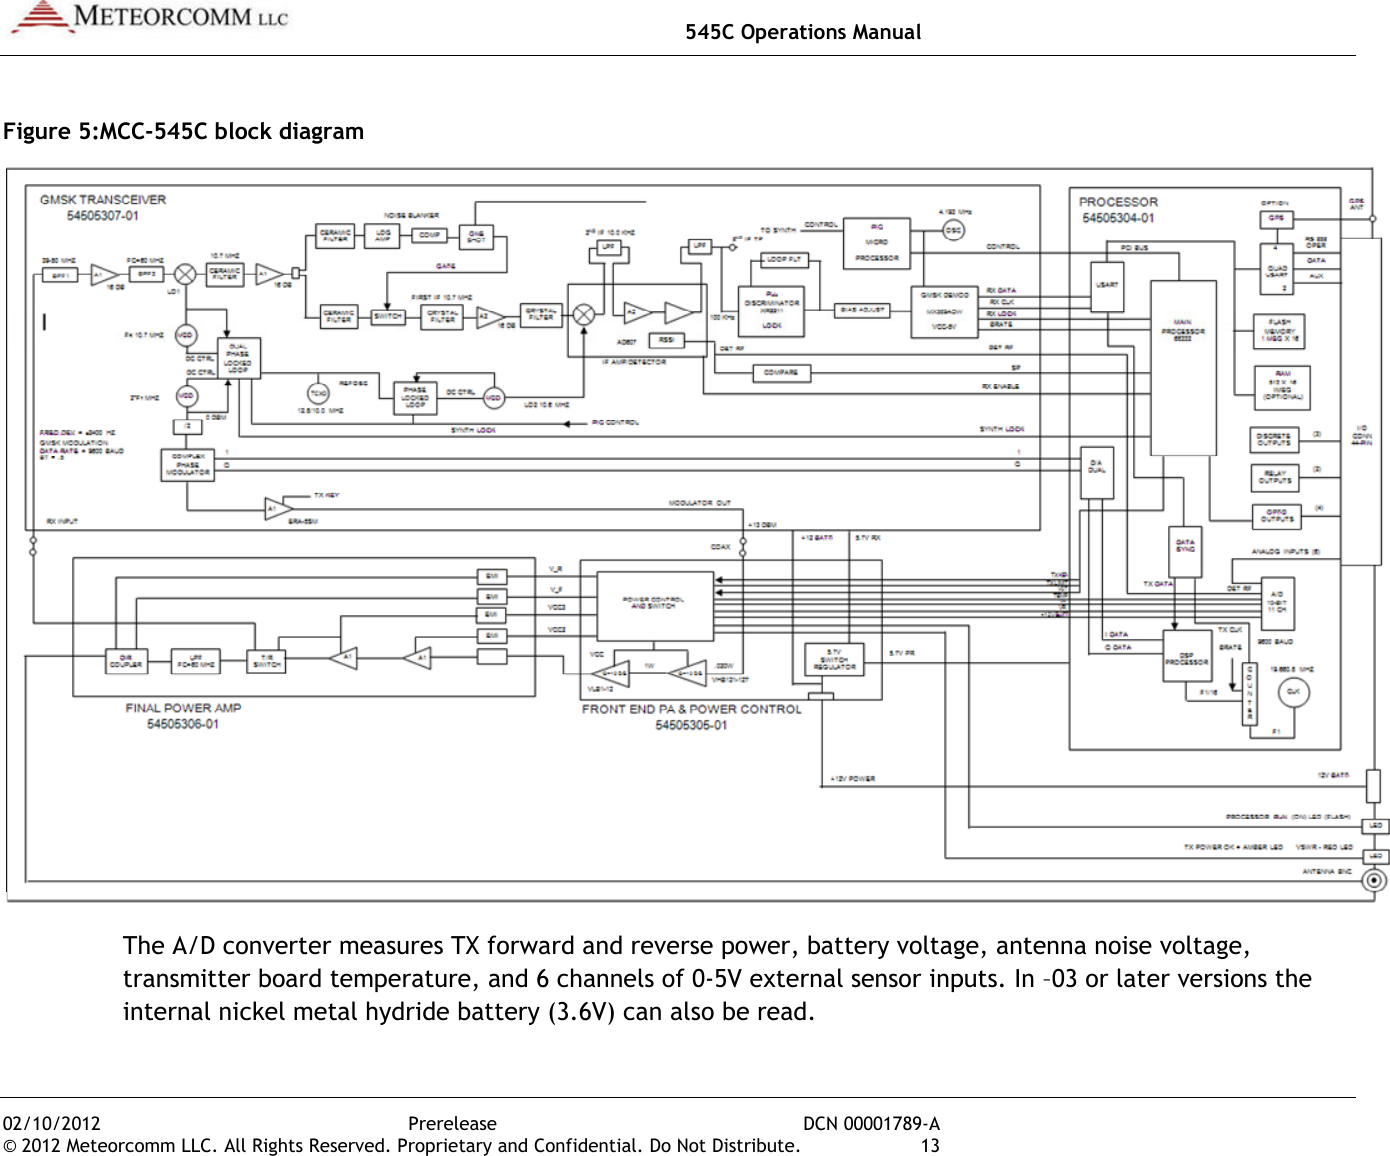   545C Operations Manual 02/10/2012  Prerelease  DCN 00001789-A © 2012 Meteorcomm LLC. All Rights Reserved. Proprietary and Confidential. Do Not Distribute.  13 Figure 5:MCC-545C block diagram  The A/D converter measures TX forward and reverse power, battery voltage, antenna noise voltage, transmitter board temperature, and 6 channels of 0-5V external sensor inputs. In –03 or later versions the internal nickel metal hydride battery (3.6V) can also be read. 